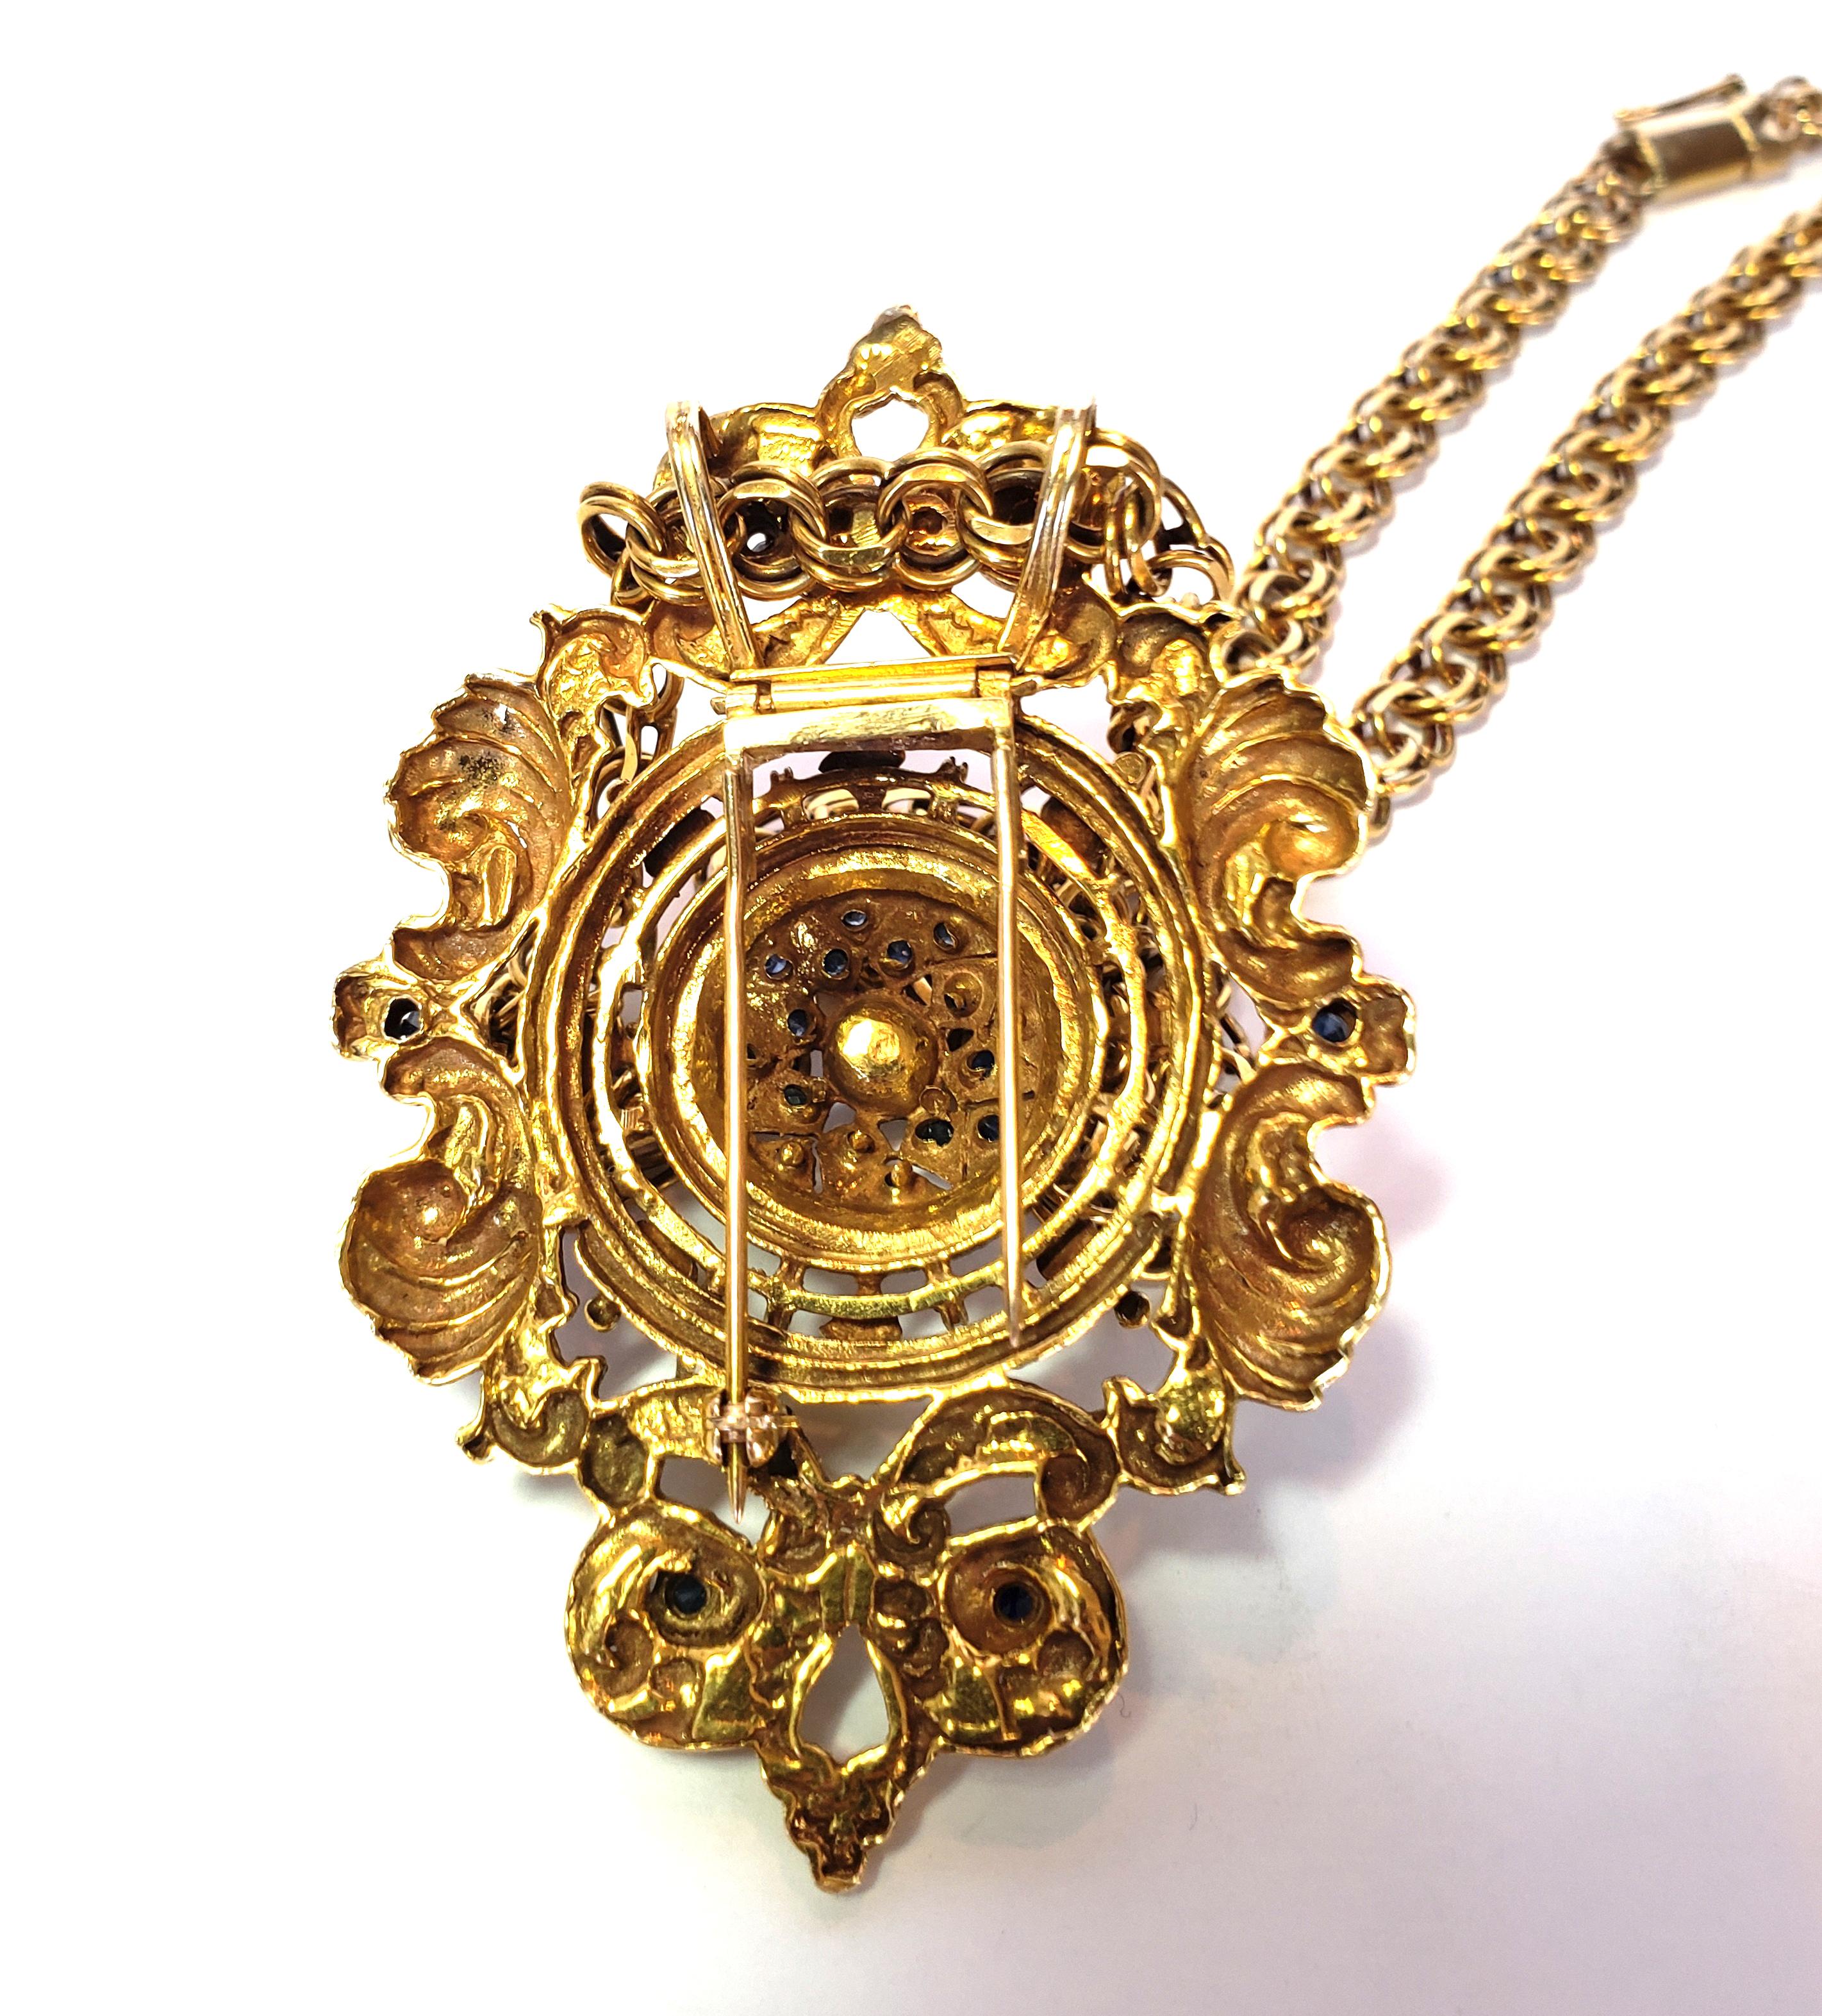 14 Karat Gold Necklace with Highly Stylized Diamond and Sapphire Pendant/Brooch For Sale 2